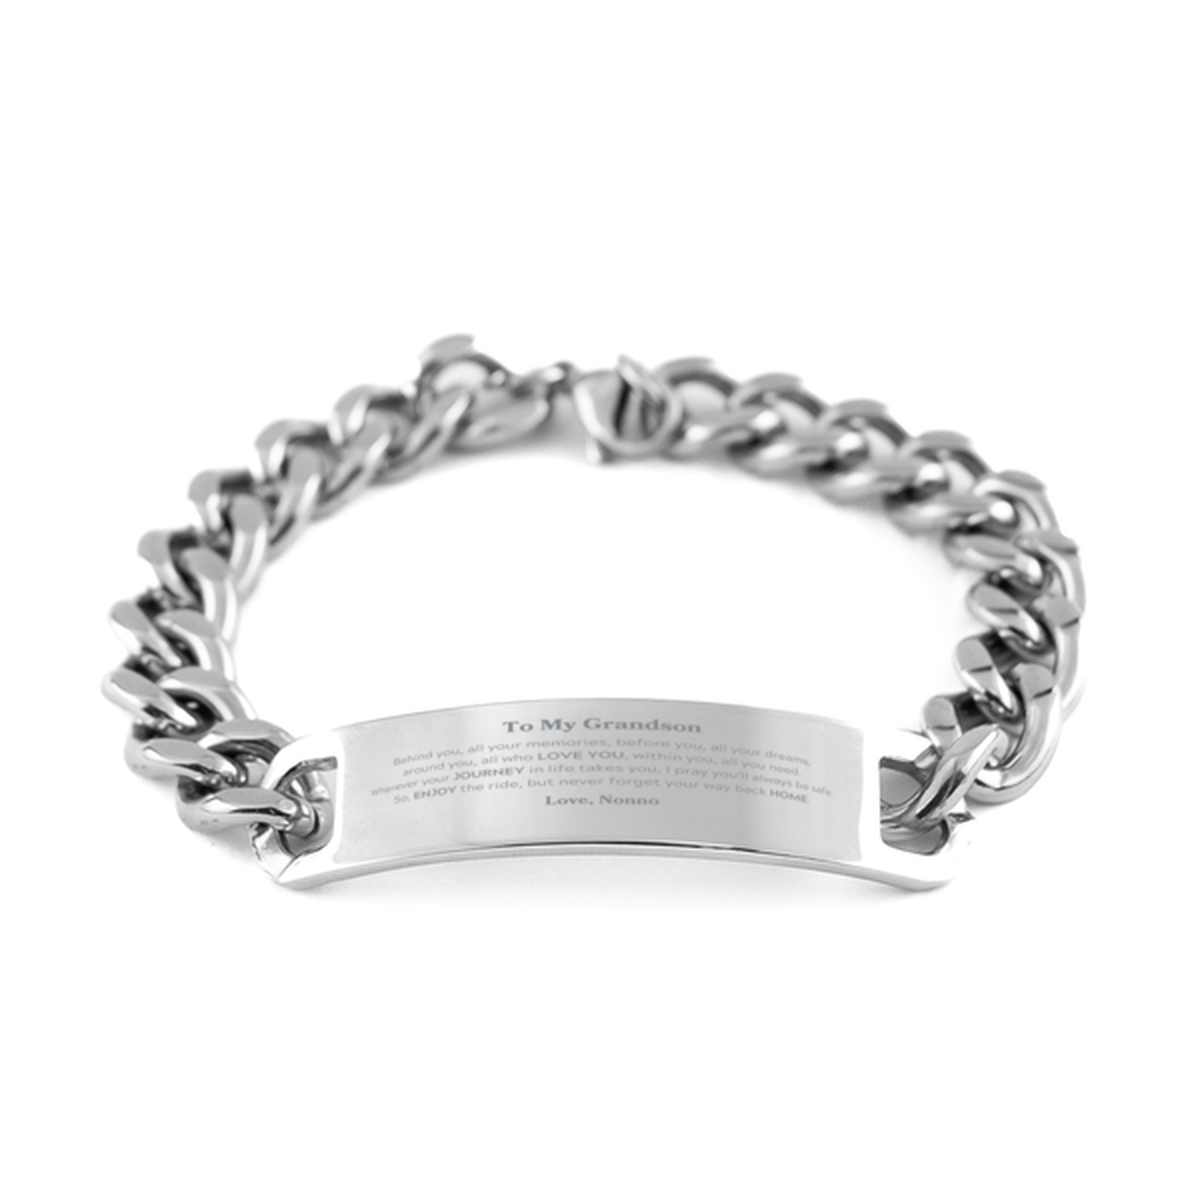 To My Grandson Graduation Gifts from Nonno, Grandson Cuban Chain Stainless Steel Bracelet Christmas Birthday Gifts for Grandson Behind you, all your memories, before you, all your dreams. Love, Nonno